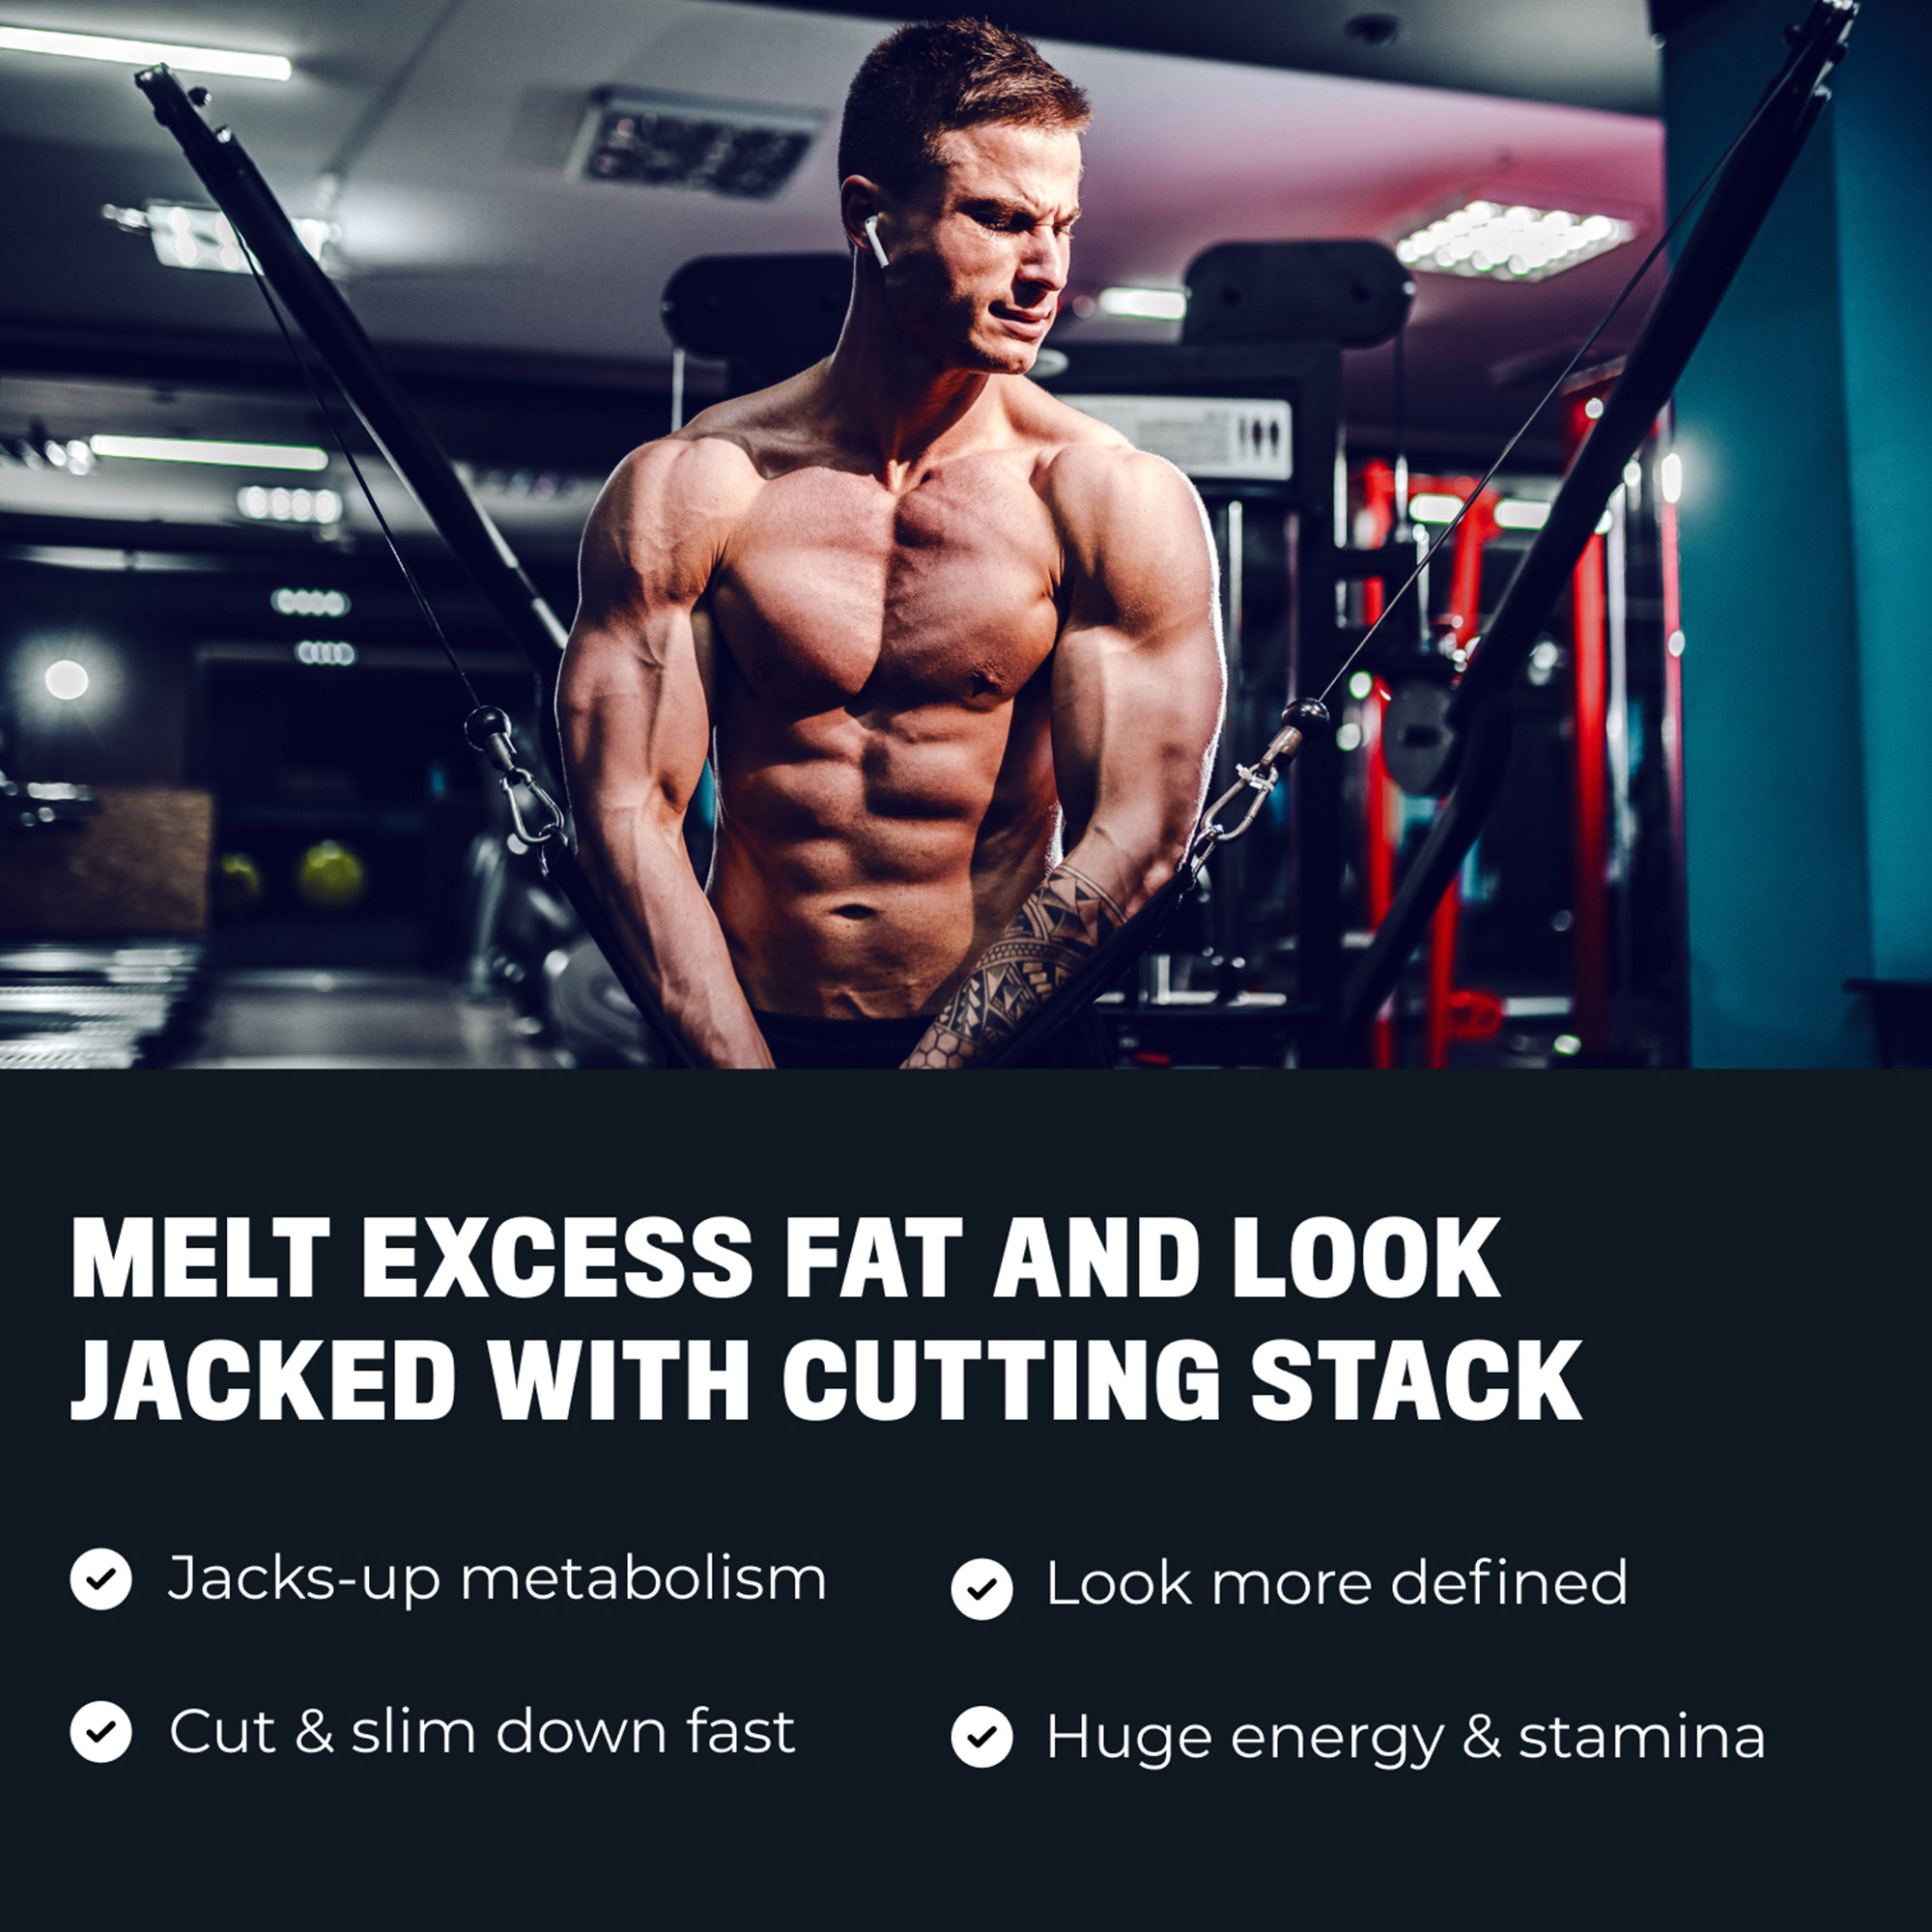 SARMS Cutting Stacks to Lose Excess Fat